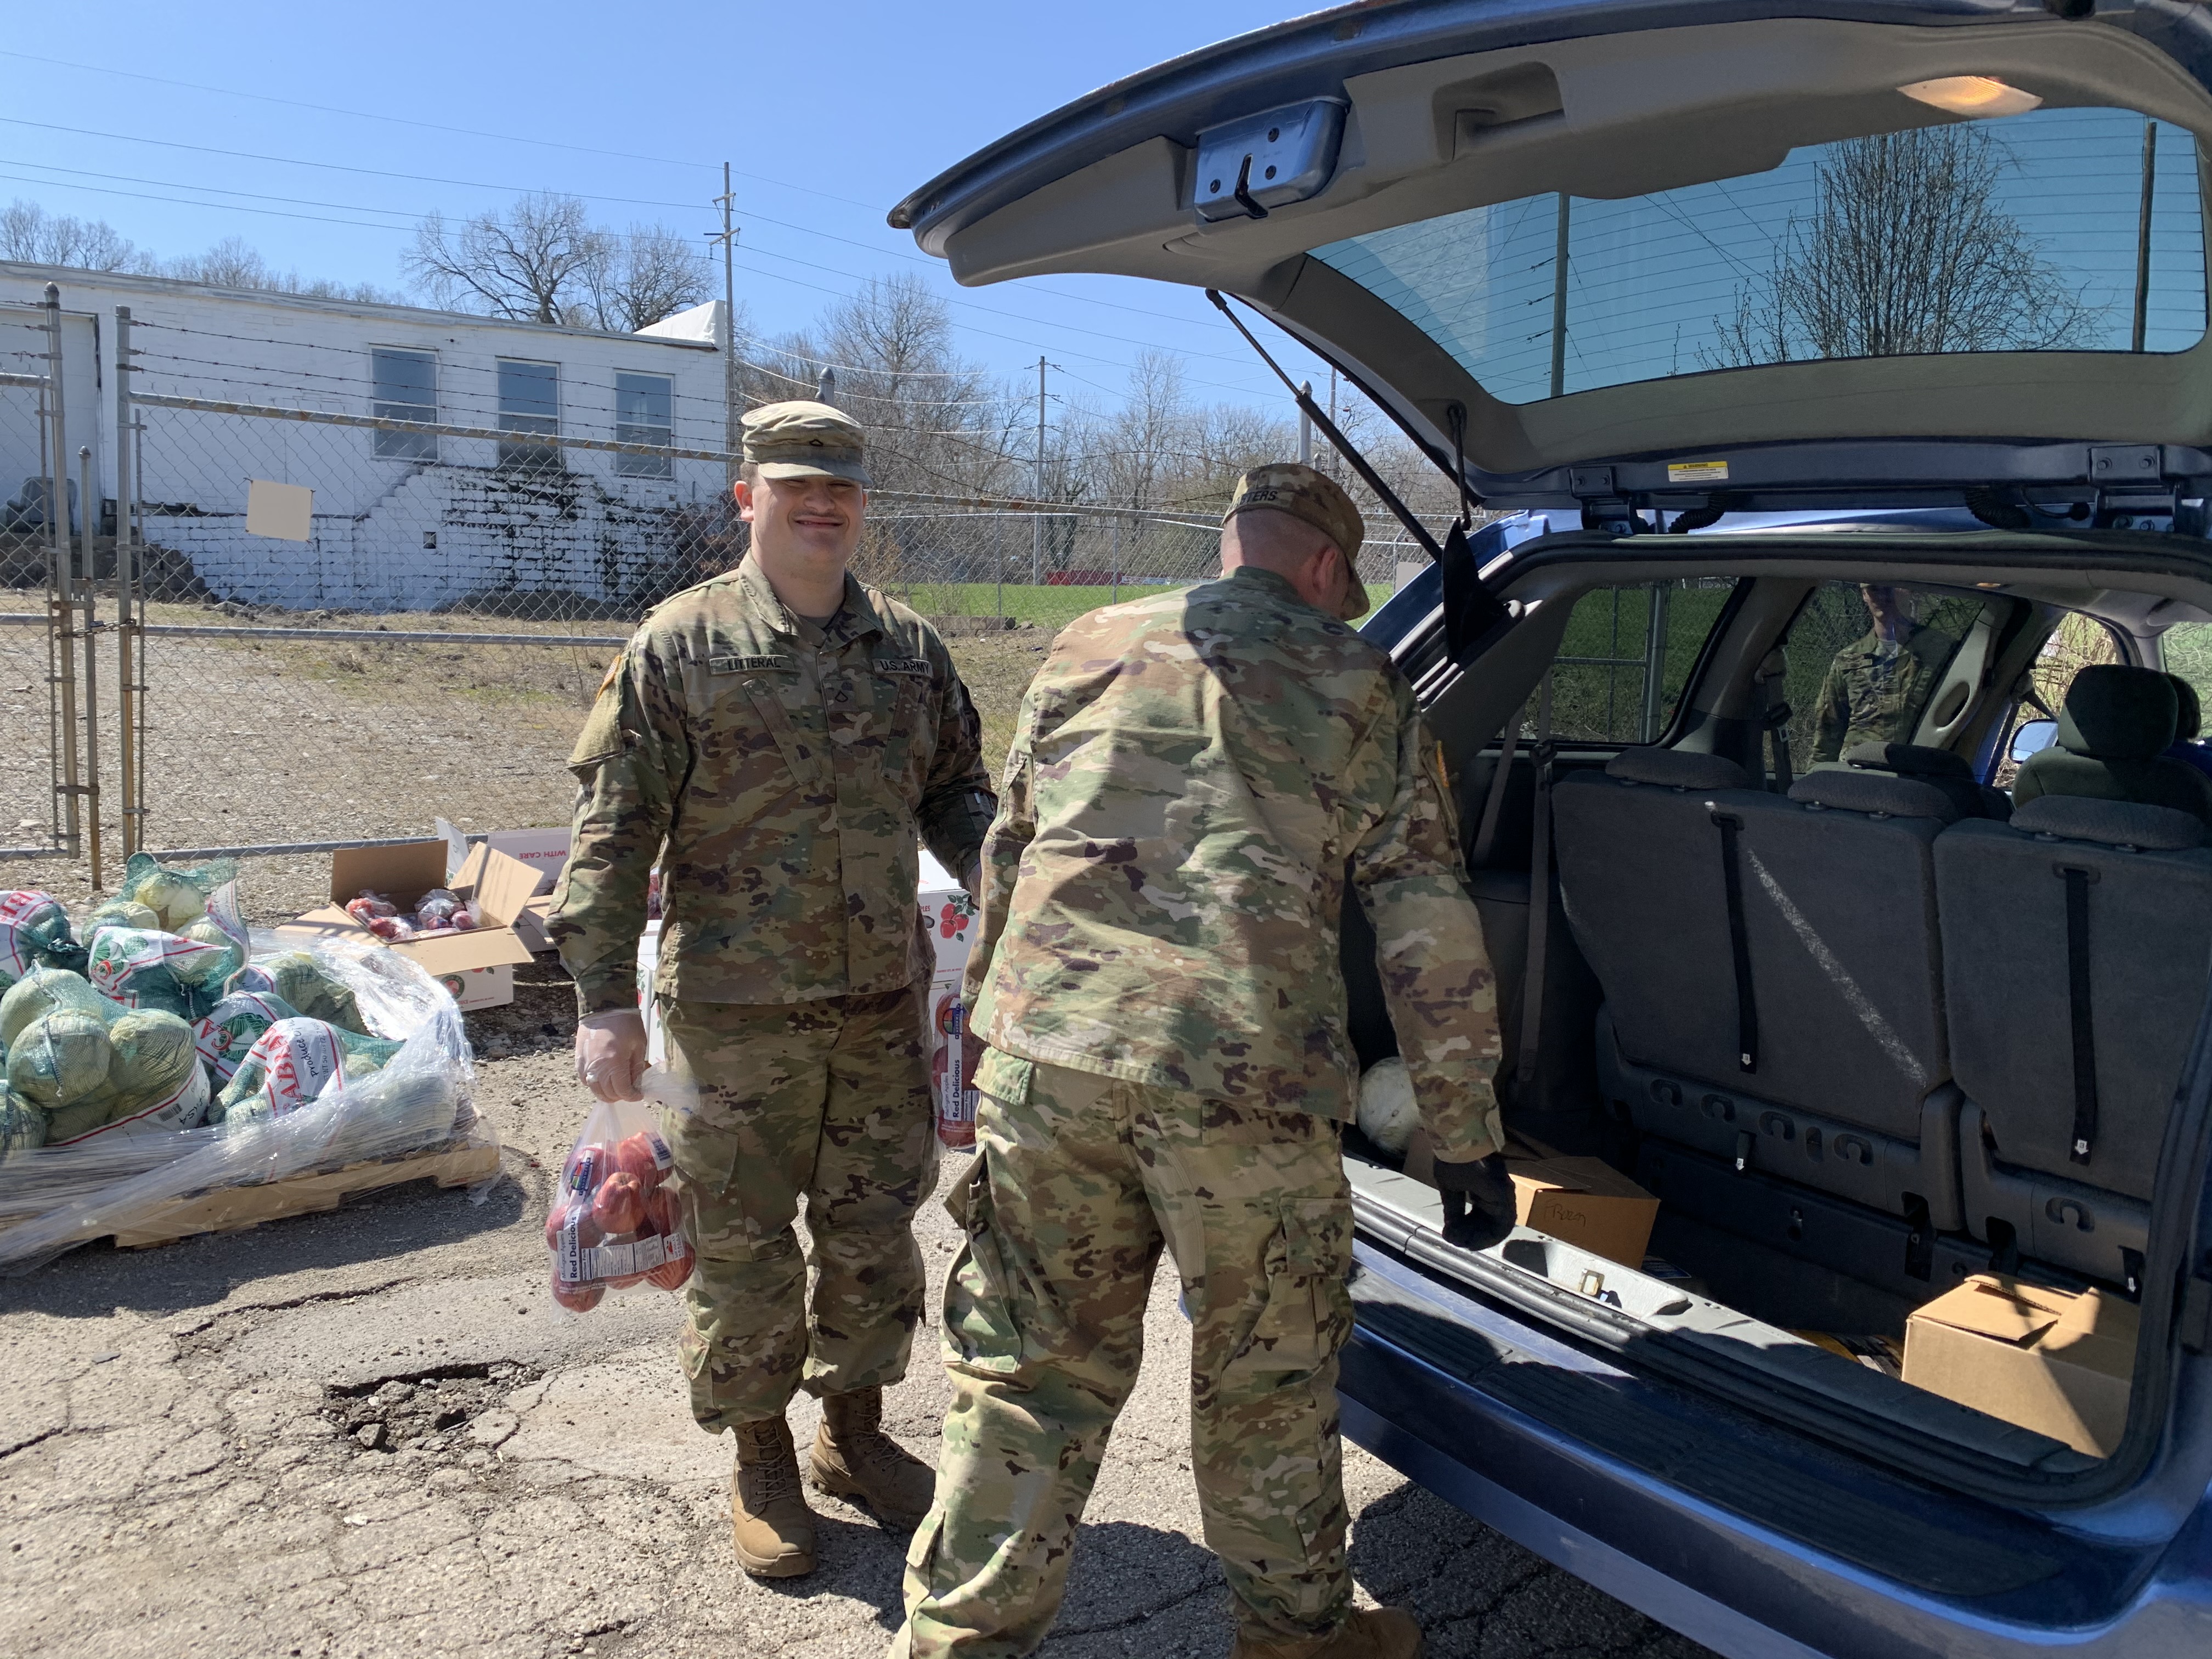 Soldiers load boxes into SUV.